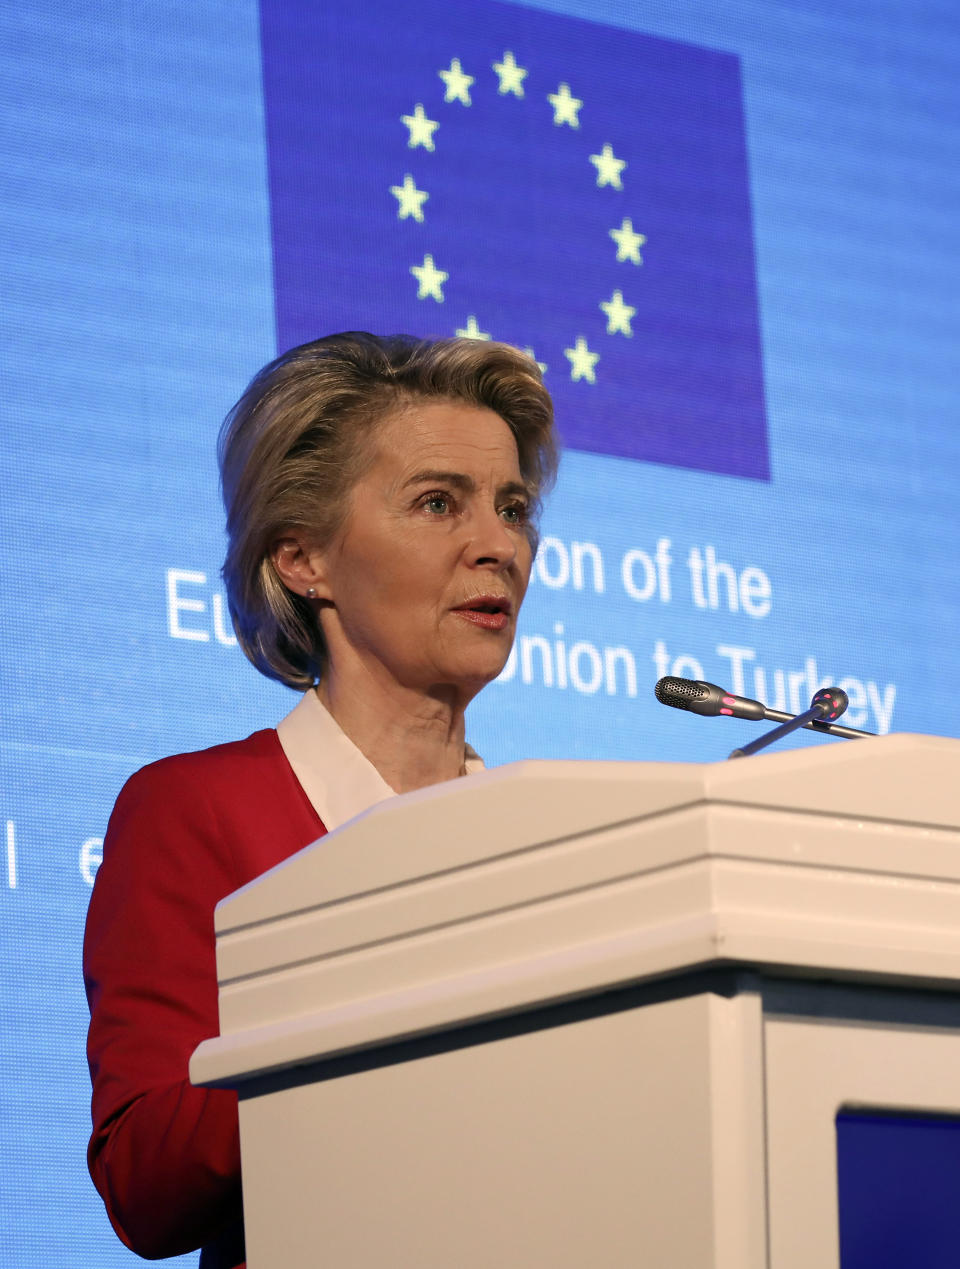 European Commission President Ursula von der Leyen speaks during a joint news conference with EU Council President Charles Michel after talks with Turkey's President Recep Tayyip Erdogan, in Ankara, Turkey, Tuesday, April 6, 2021. Top European Union officials met with Erdogan in Ankara on Tuesday, weeks after EU leaders agreed to boost trade and improve cooperation on migration following conciliatory steps from Turkey. (AP Photo/Burhan Ozbilici)